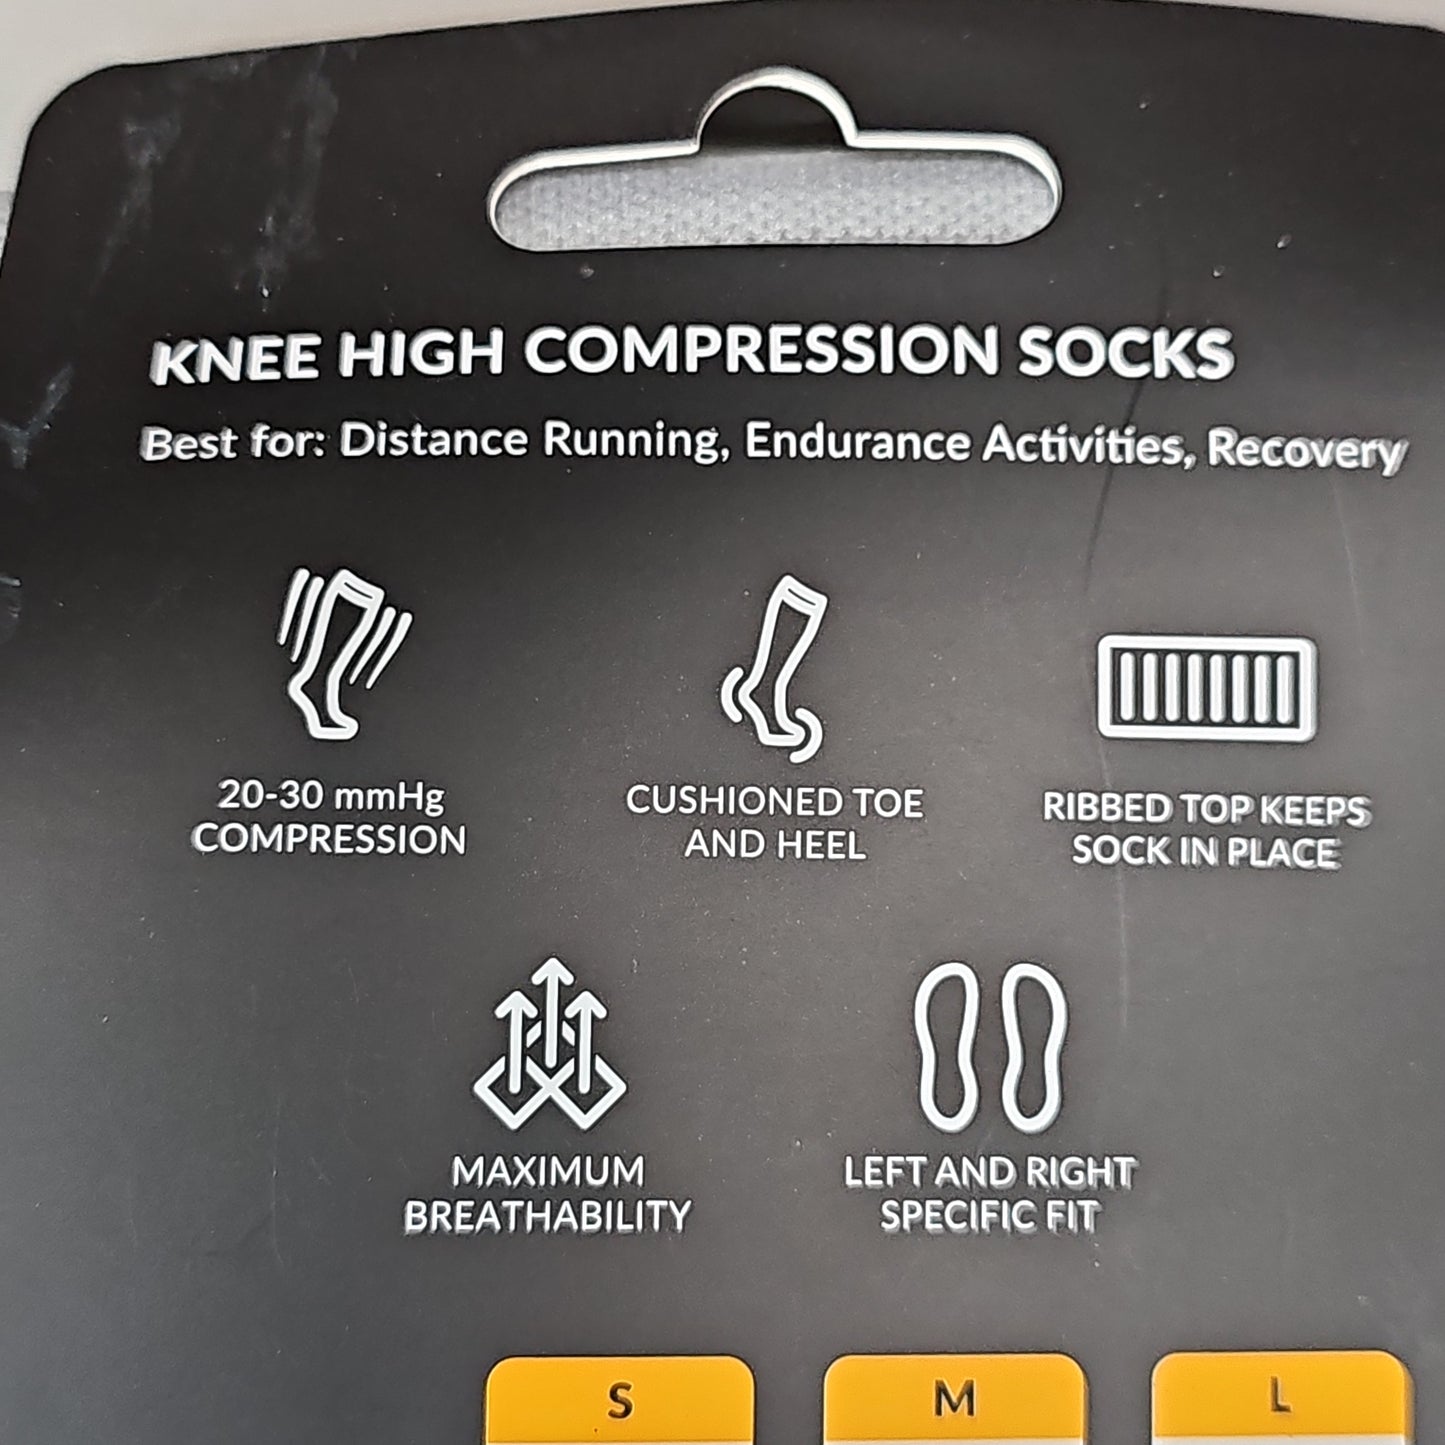 NATHAN Speed Knee High Compression Socks Sz M Monument Grey NS10660-80128-M (New)